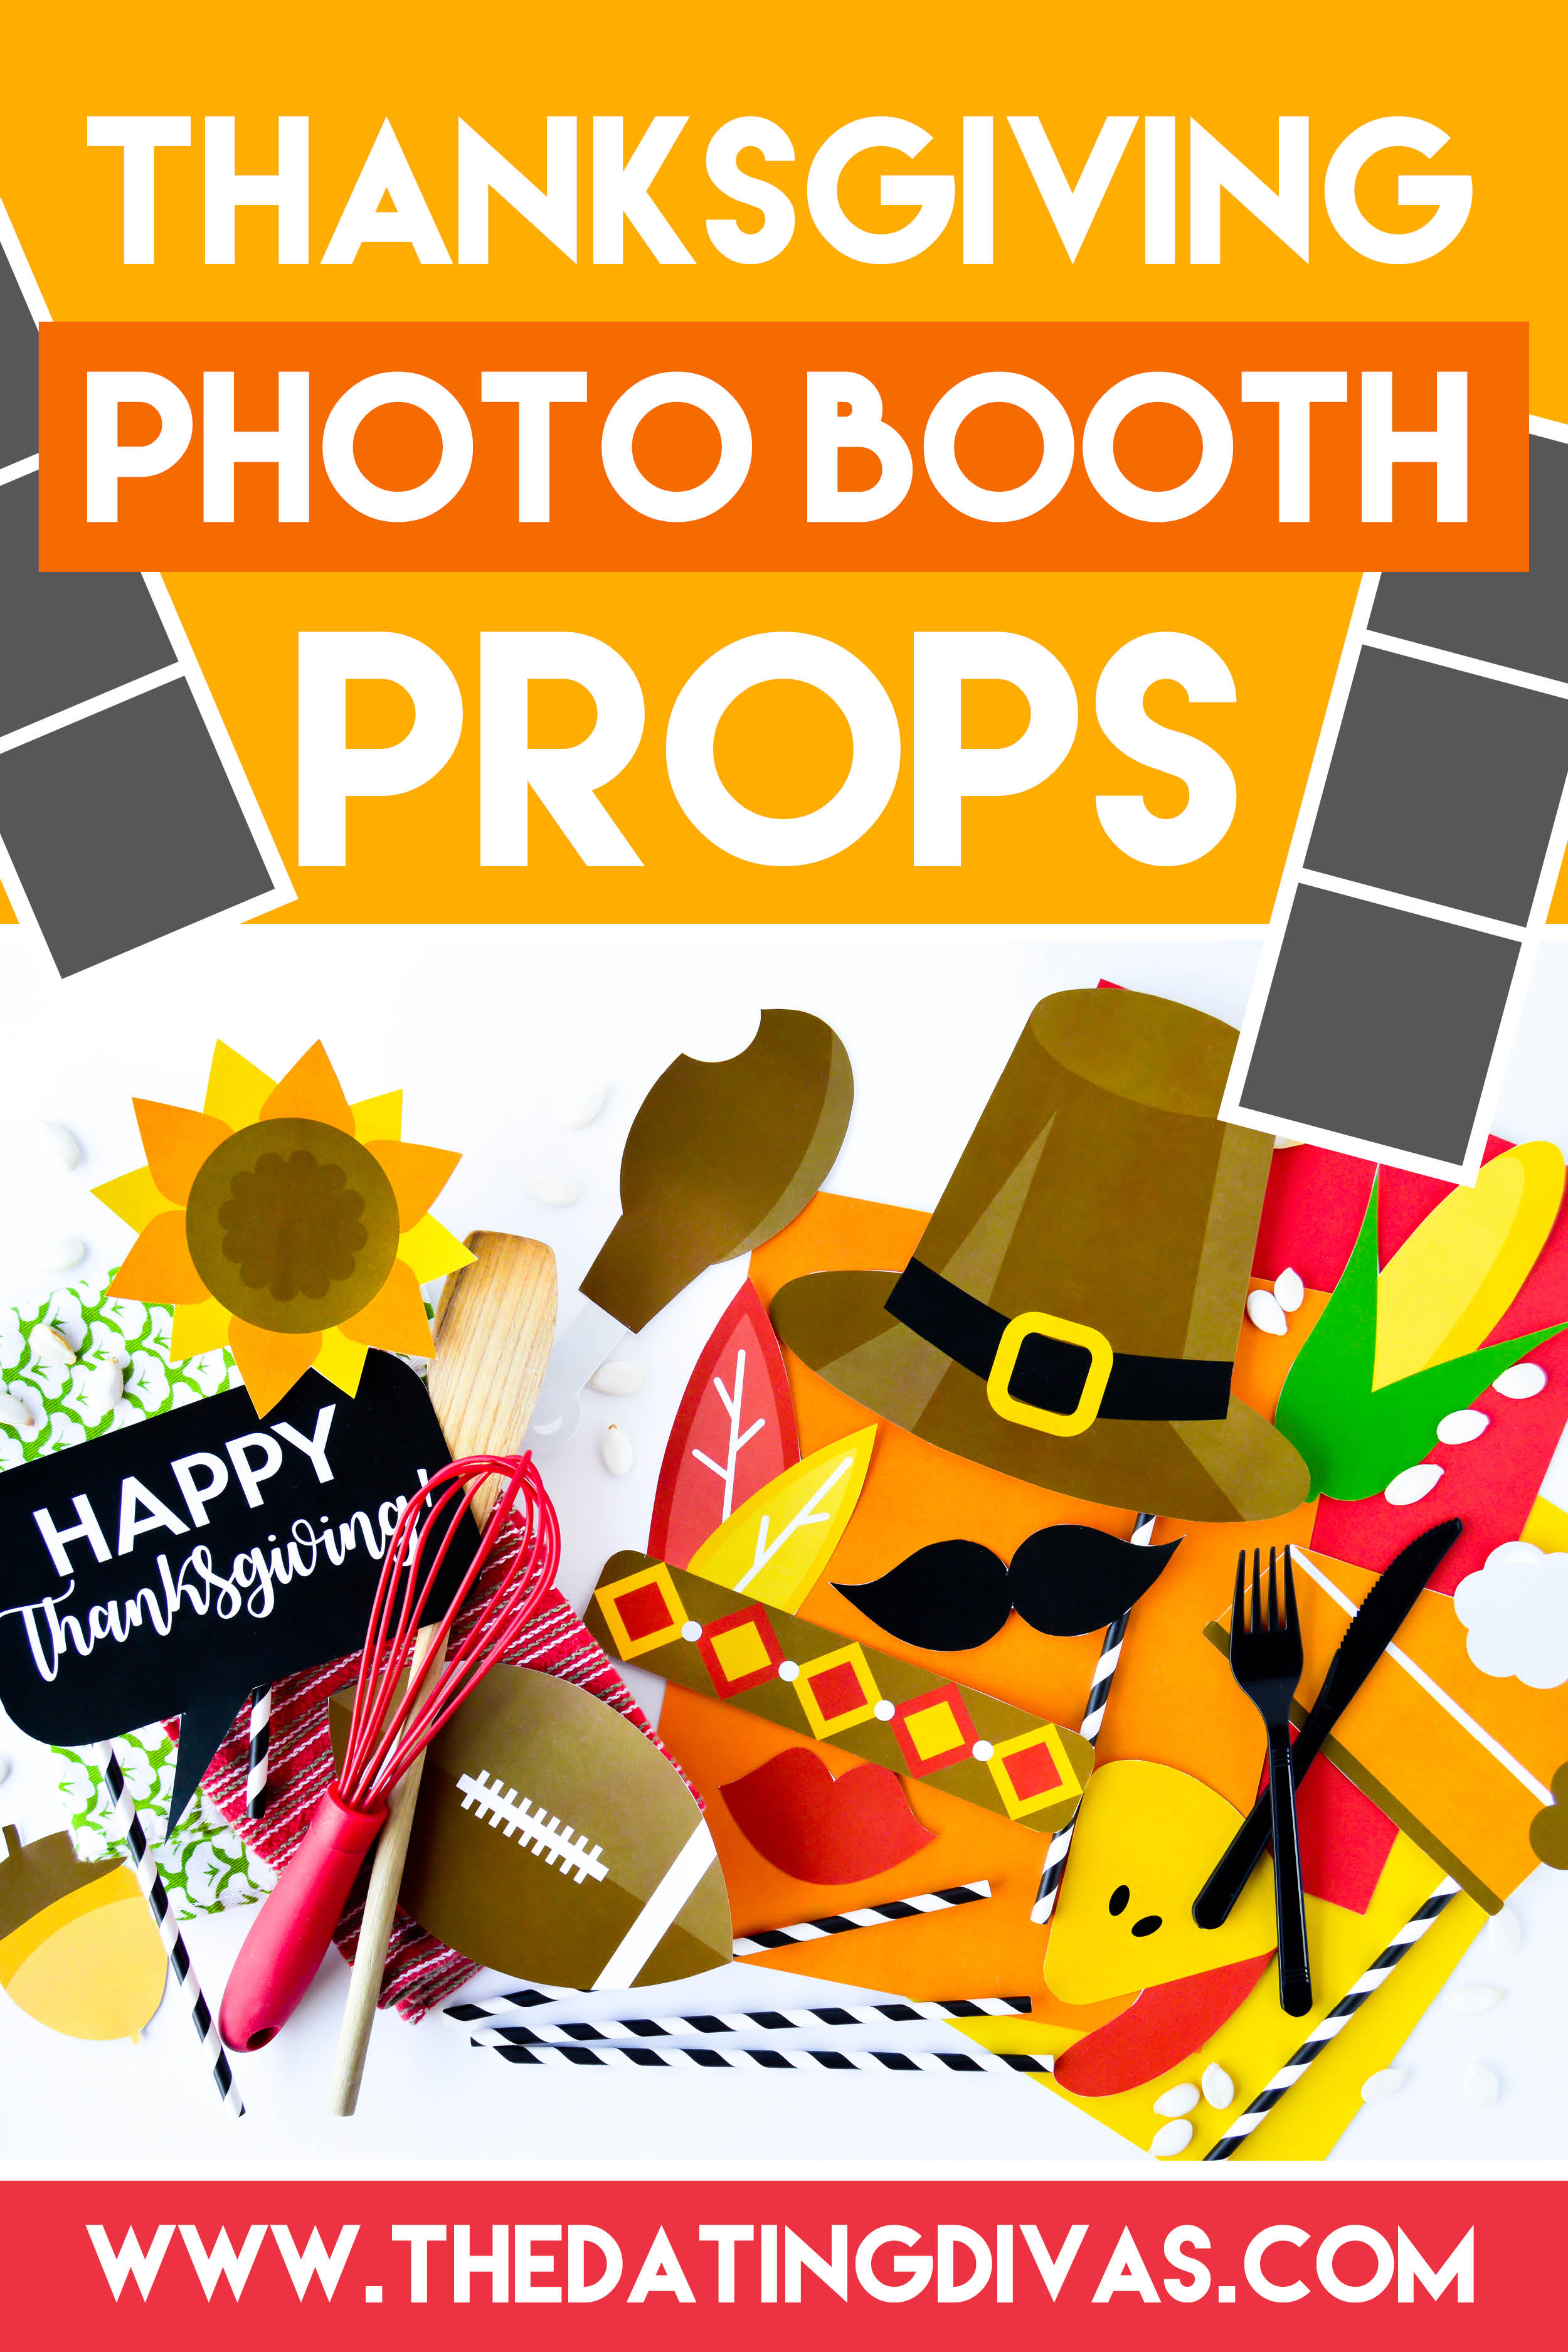 FREE Thanksgiving Photo Booth Props that are to-die-for adorable!!! #thedatingdivas #thanksgivingphotoboothprops #photoprops #thanksgivingphotobooth